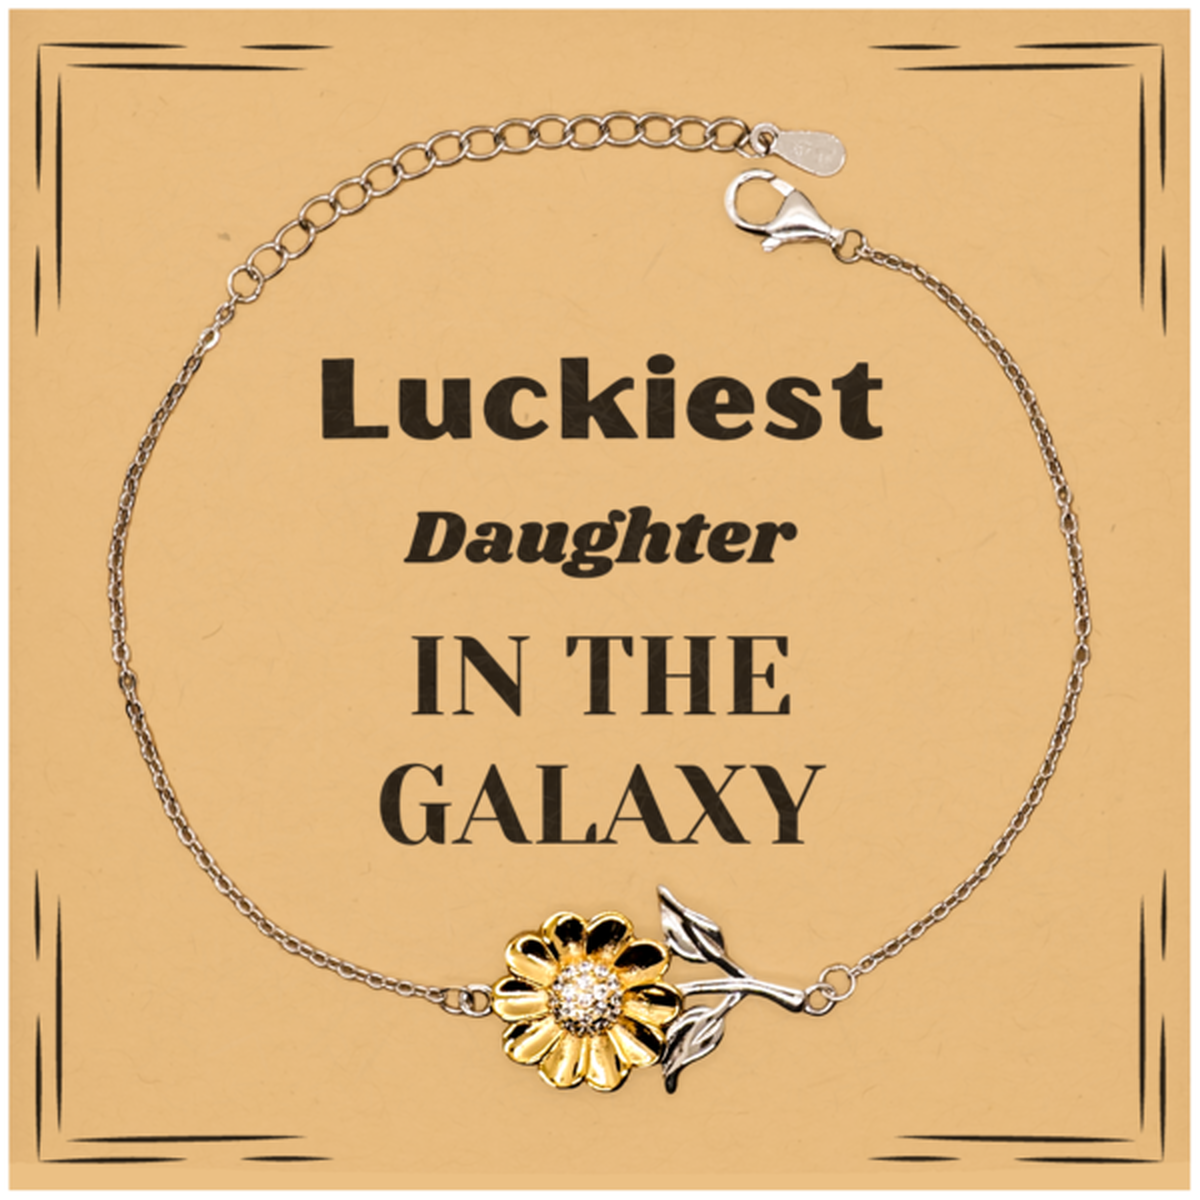 Luckiest Daughter in the Galaxy, To My Daughter Message Card Gifts, Christmas Daughter Sunflower Bracelet Gifts, X-mas Birthday Unique Gifts For Daughter Men Women